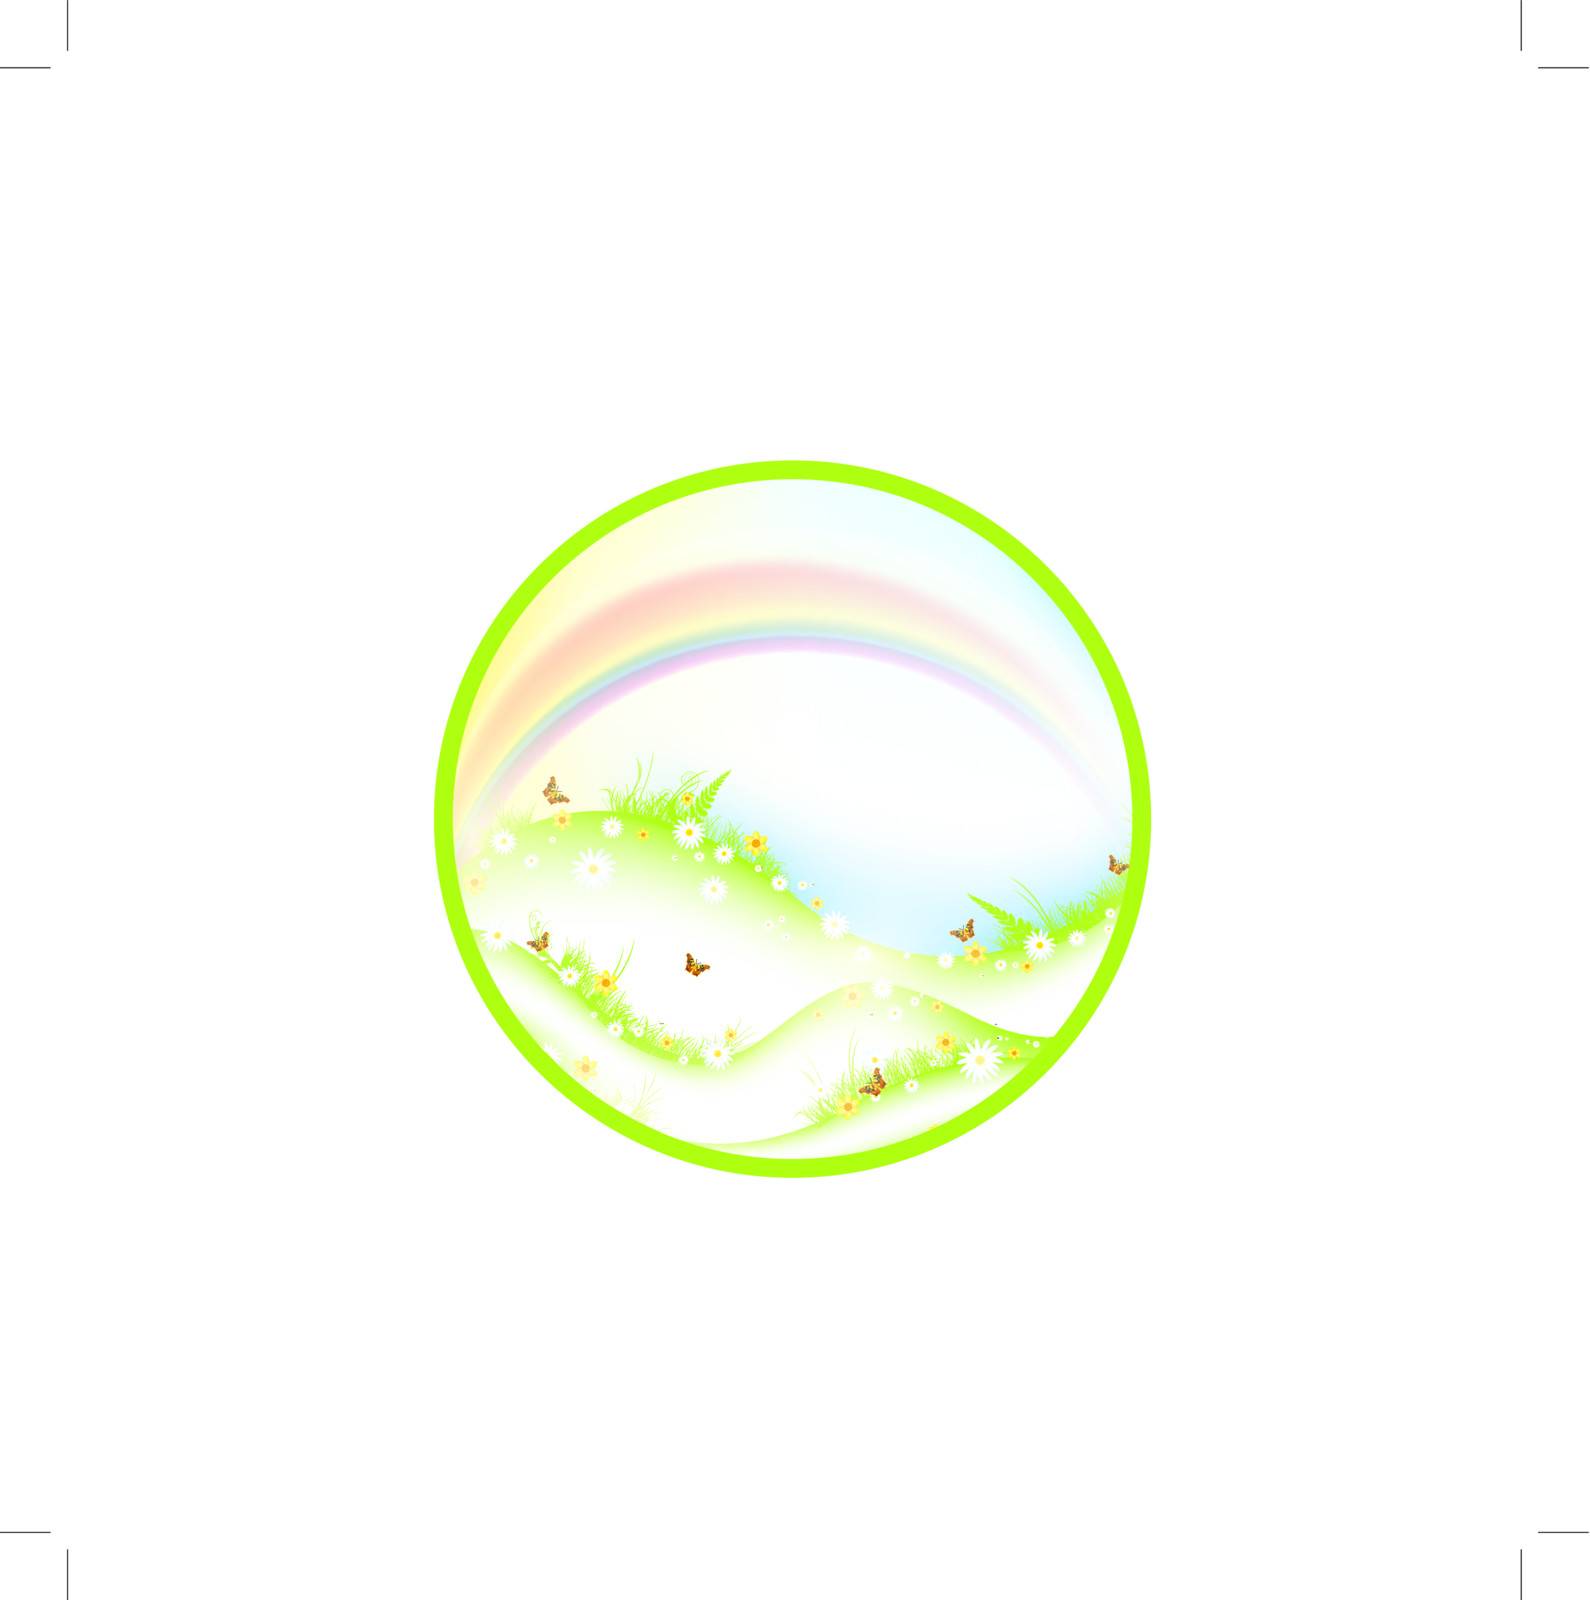 Summer or spring theme with meadow, rainbow and butterflies in round shape, EPS10 